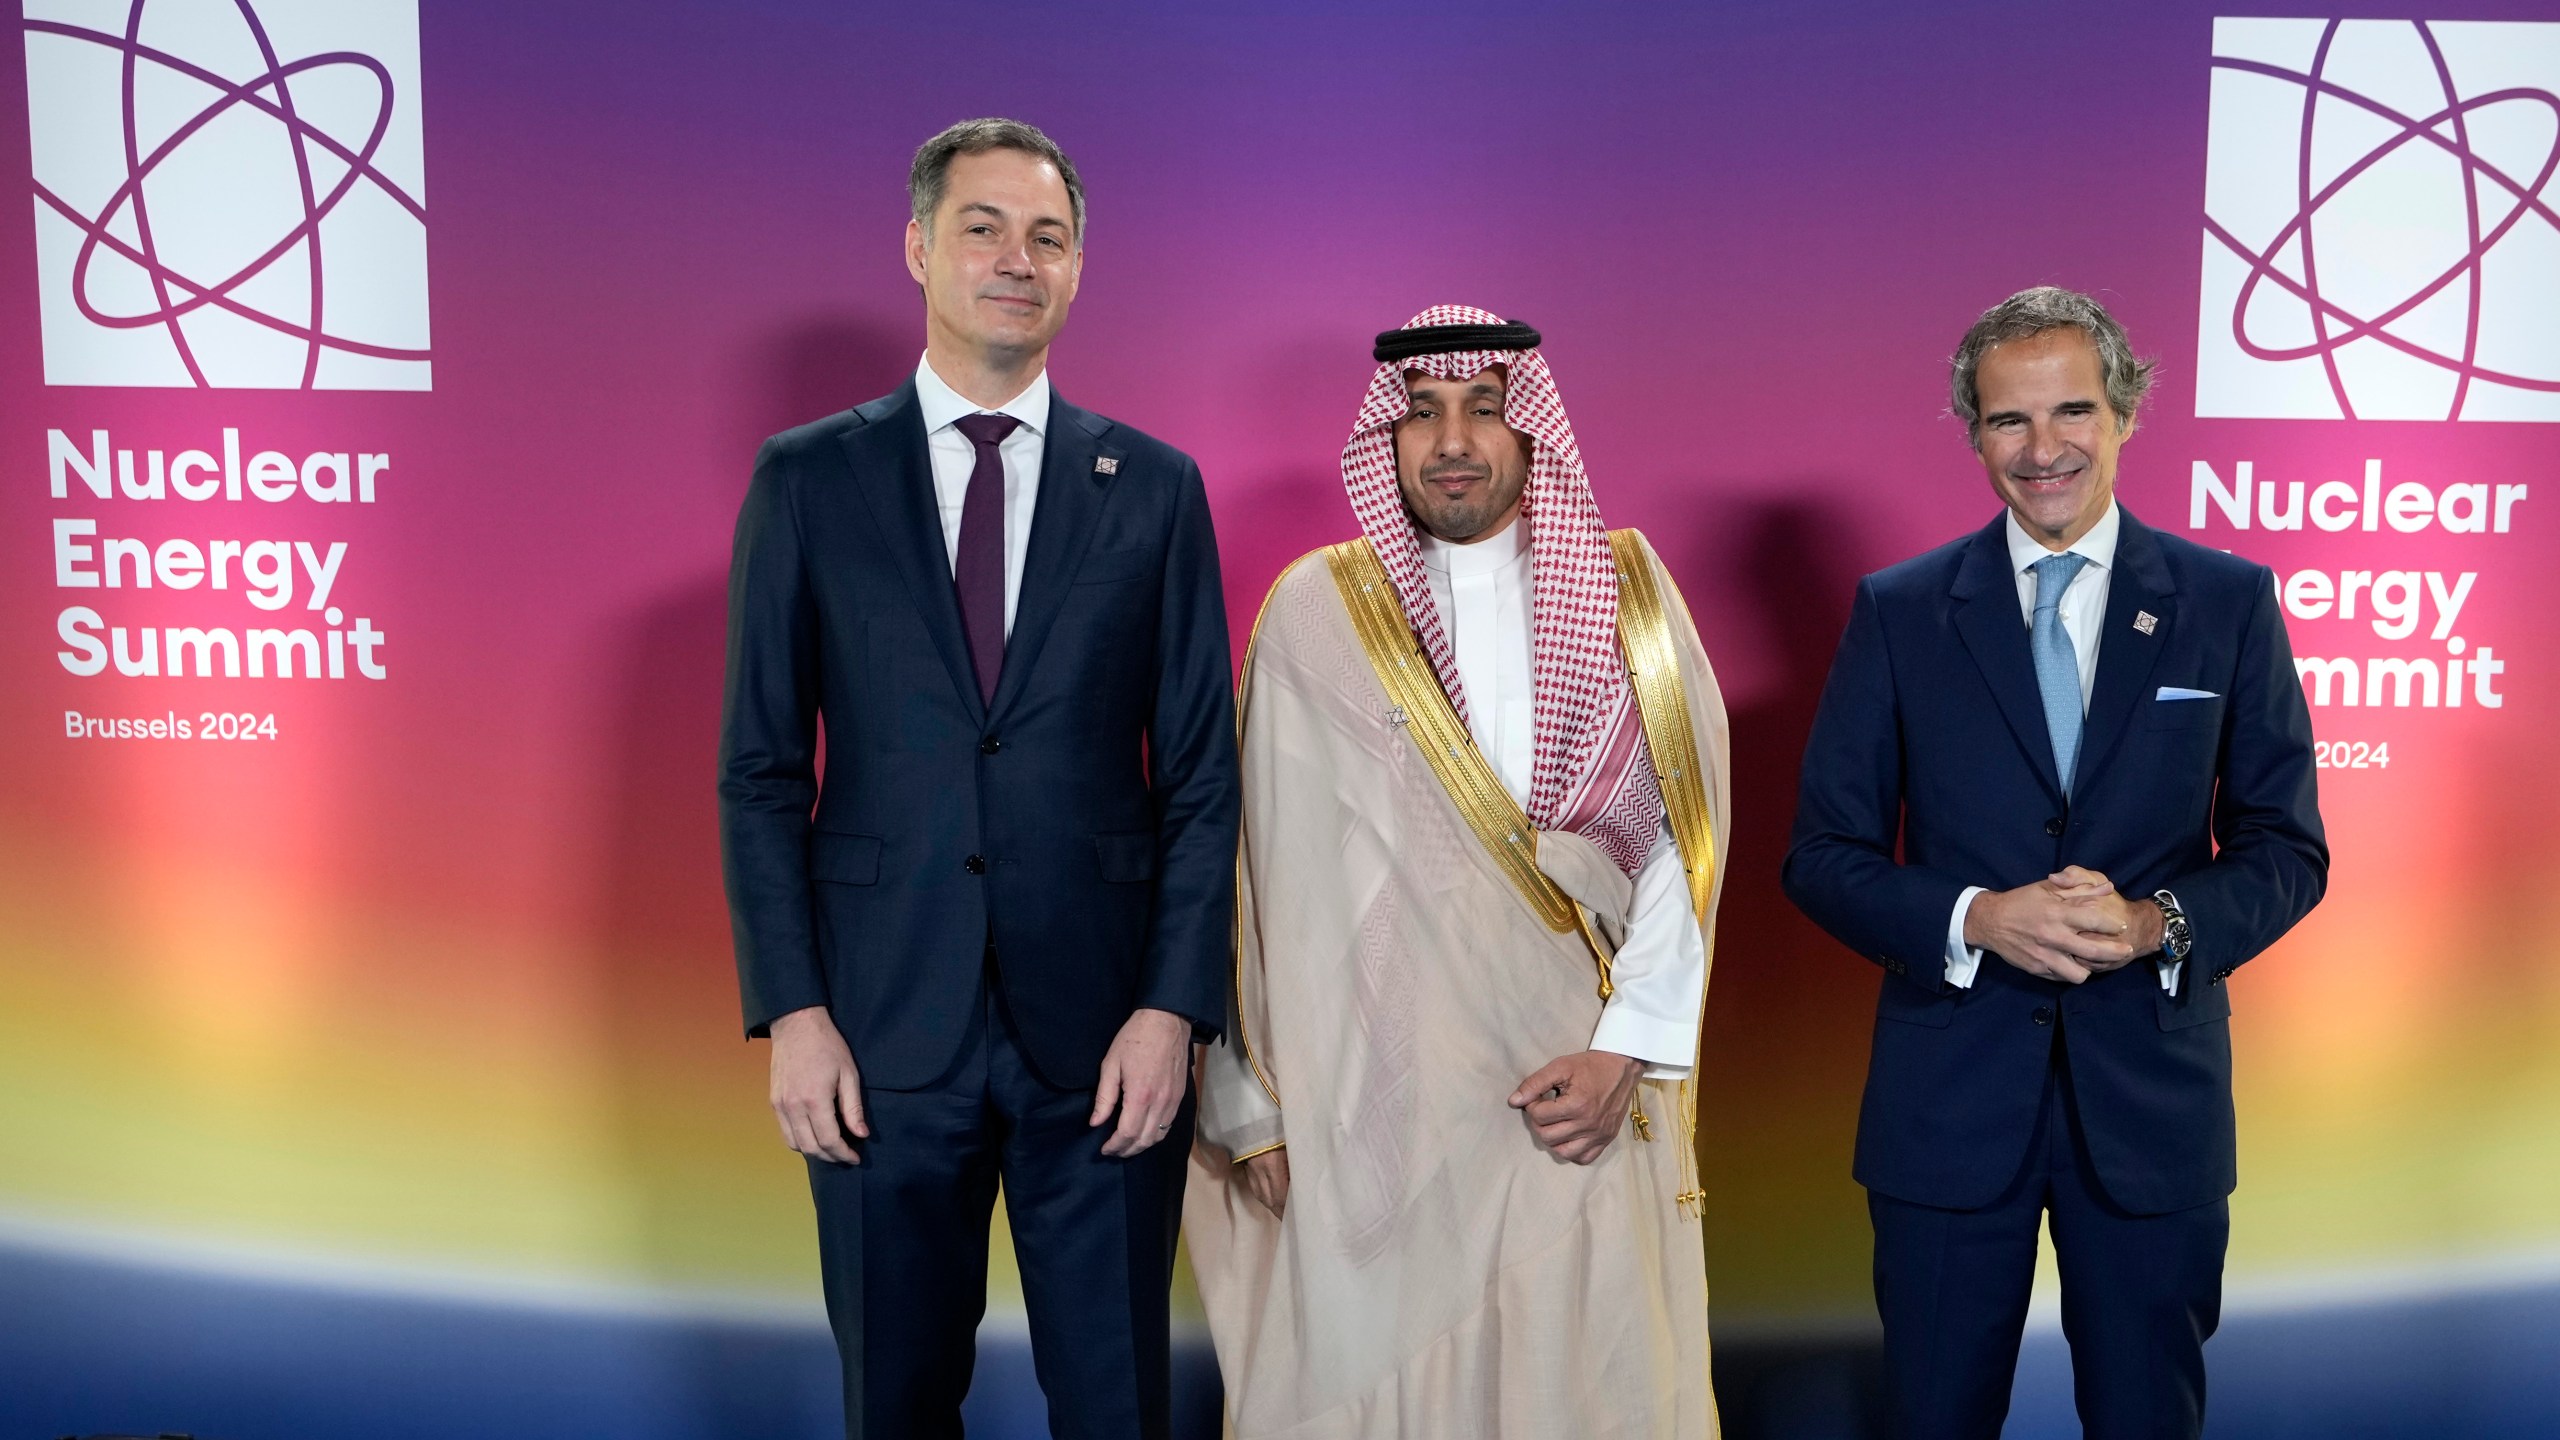 Belgium's Prime Minister Alexander De Croo, left, and Secretary General of the IAEA Rafael Mariano Grossi, right, welcome Saudi Arabia's CEO of King Abdullah during arrivals City for Atomic and Renewable Energy Prince Mamdooh Bin Saud Bin Thinyyan Bin Mohammed Al Saud during a Nuclear Energy Summit at the Expo in Brussels, Thursday, March 21, 2024. (AP Photo/Virginia Mayo)